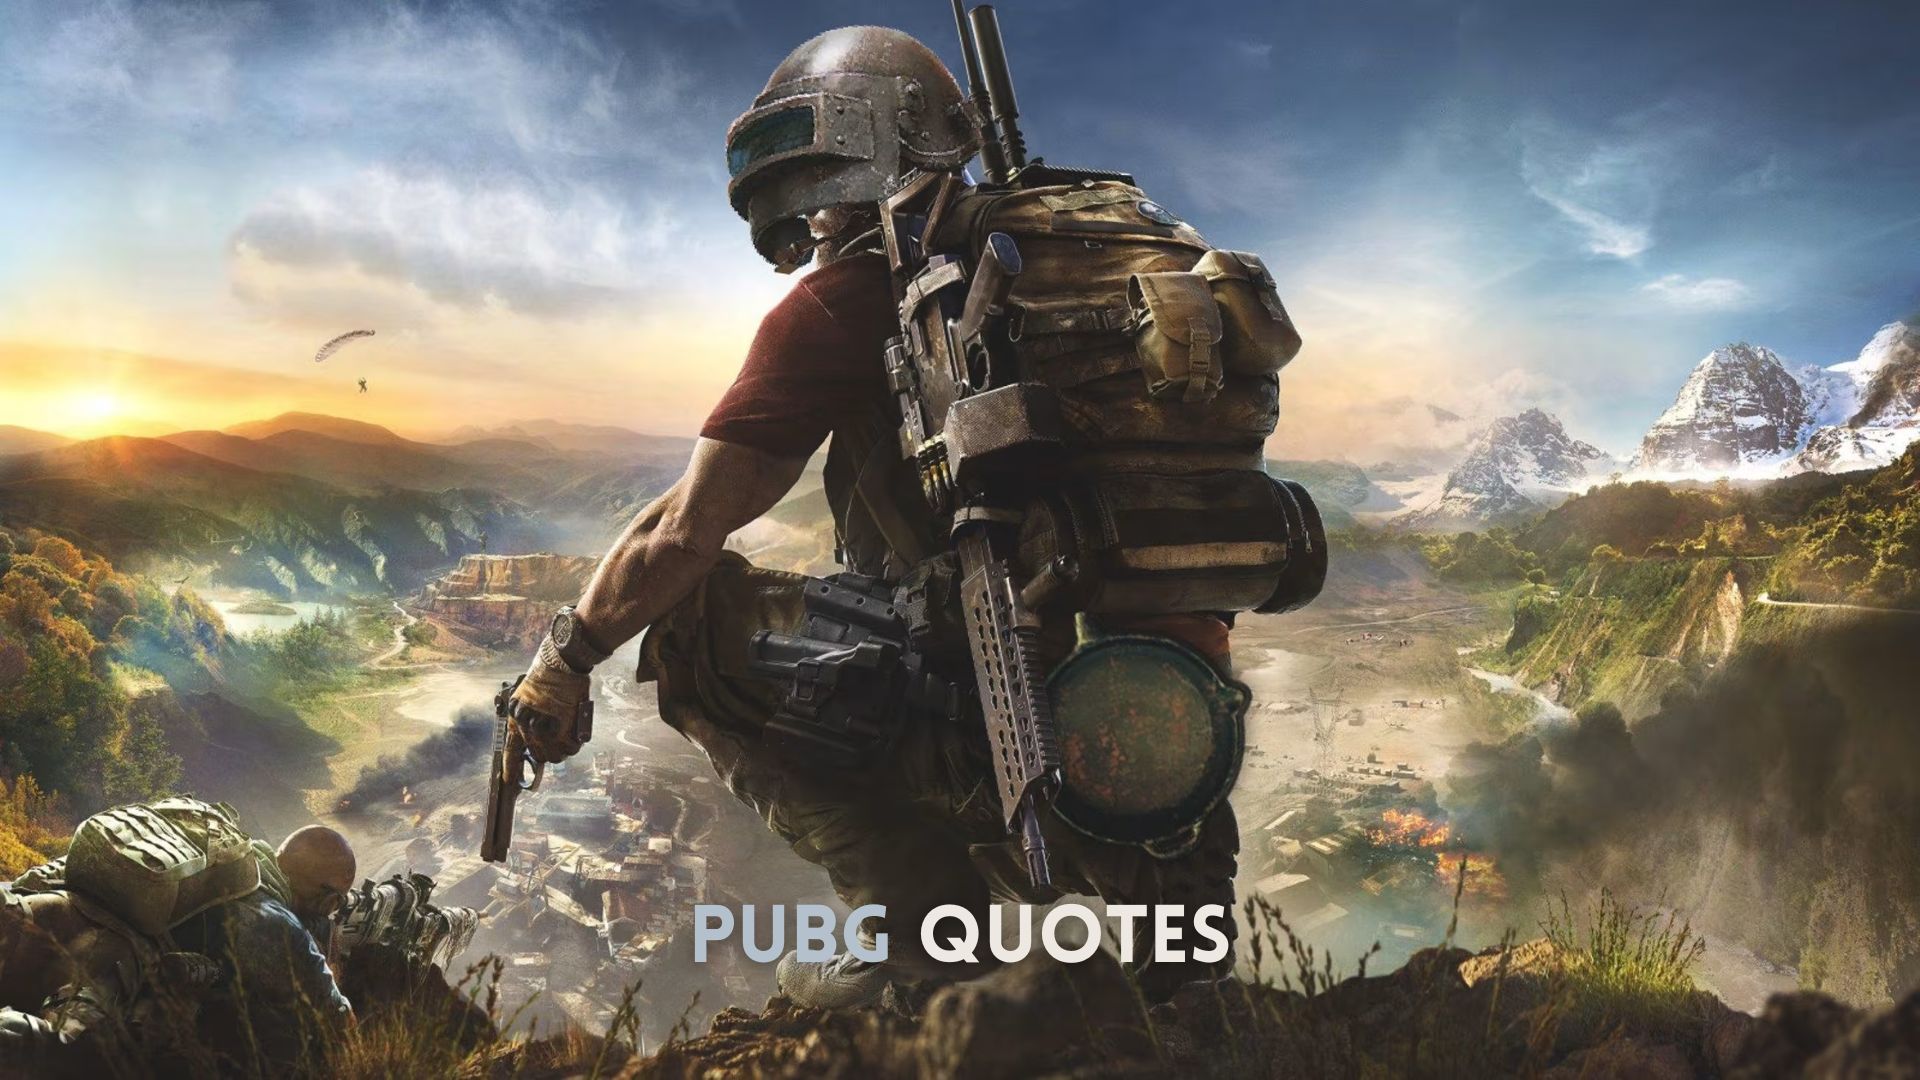 Pubg Quotes and Captions with Images